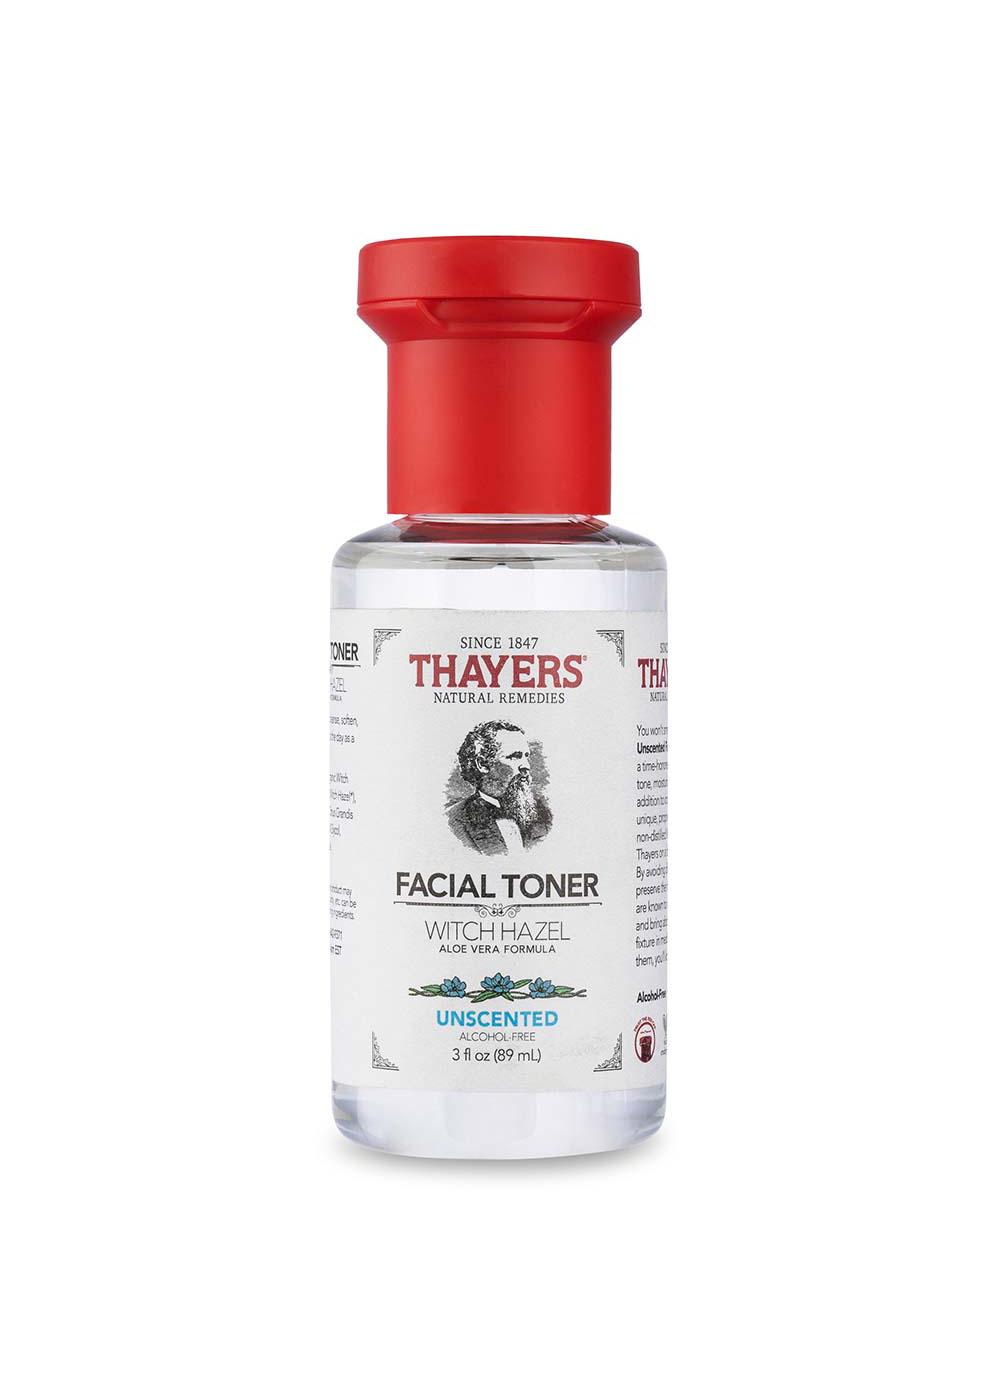 Thayers Facial Toner - Unscented; image 1 of 2